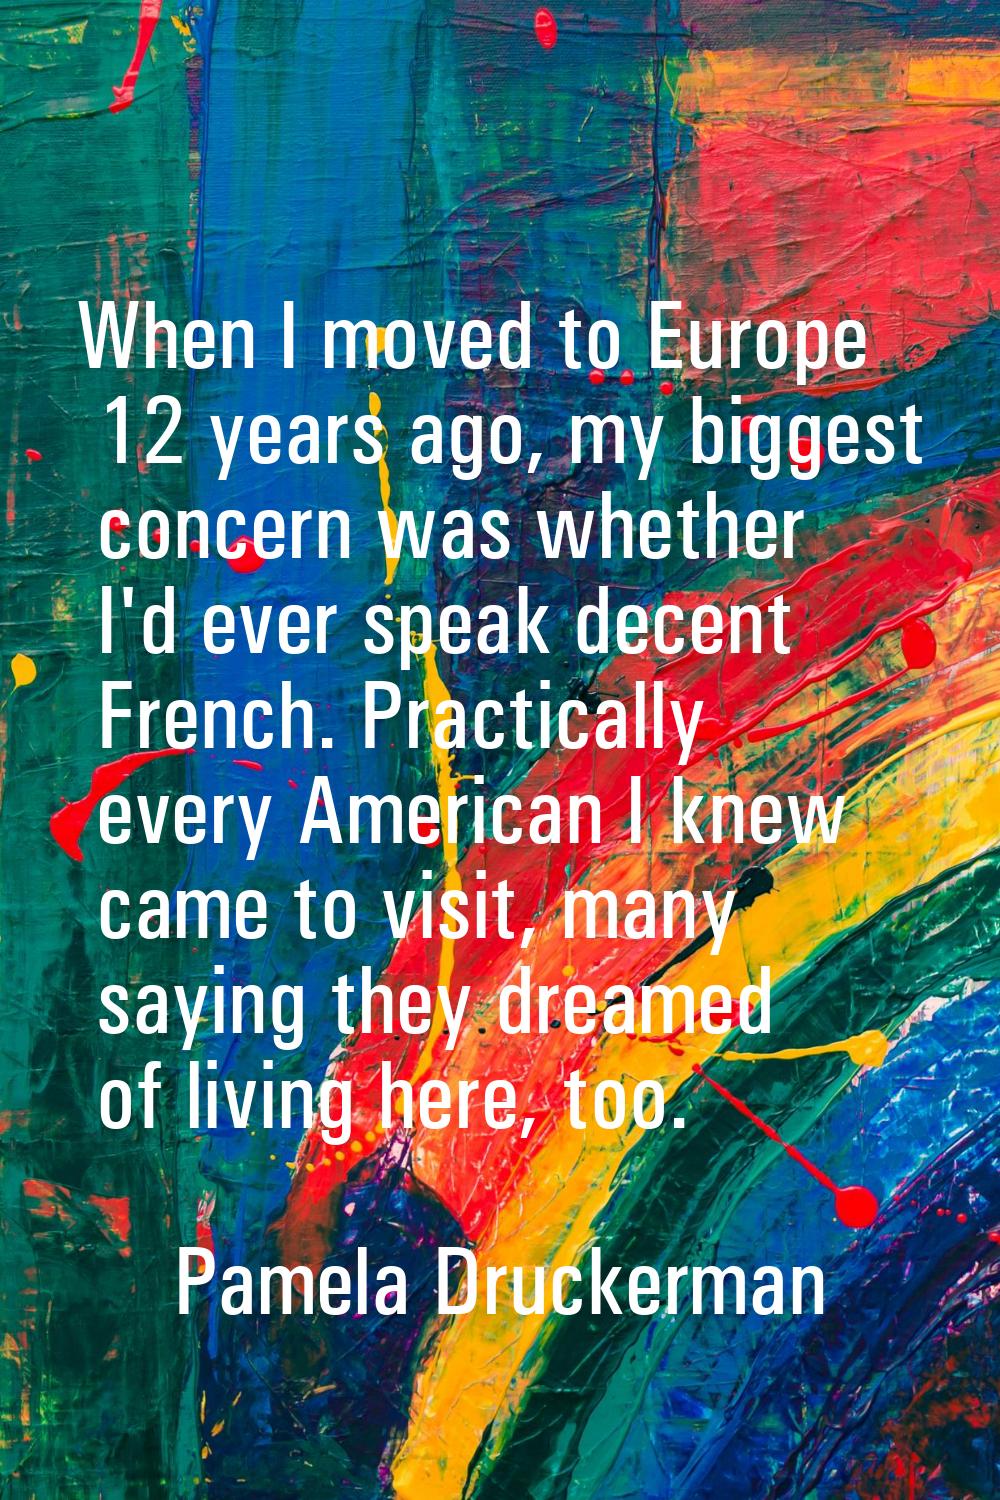 When I moved to Europe 12 years ago, my biggest concern was whether I'd ever speak decent French. P